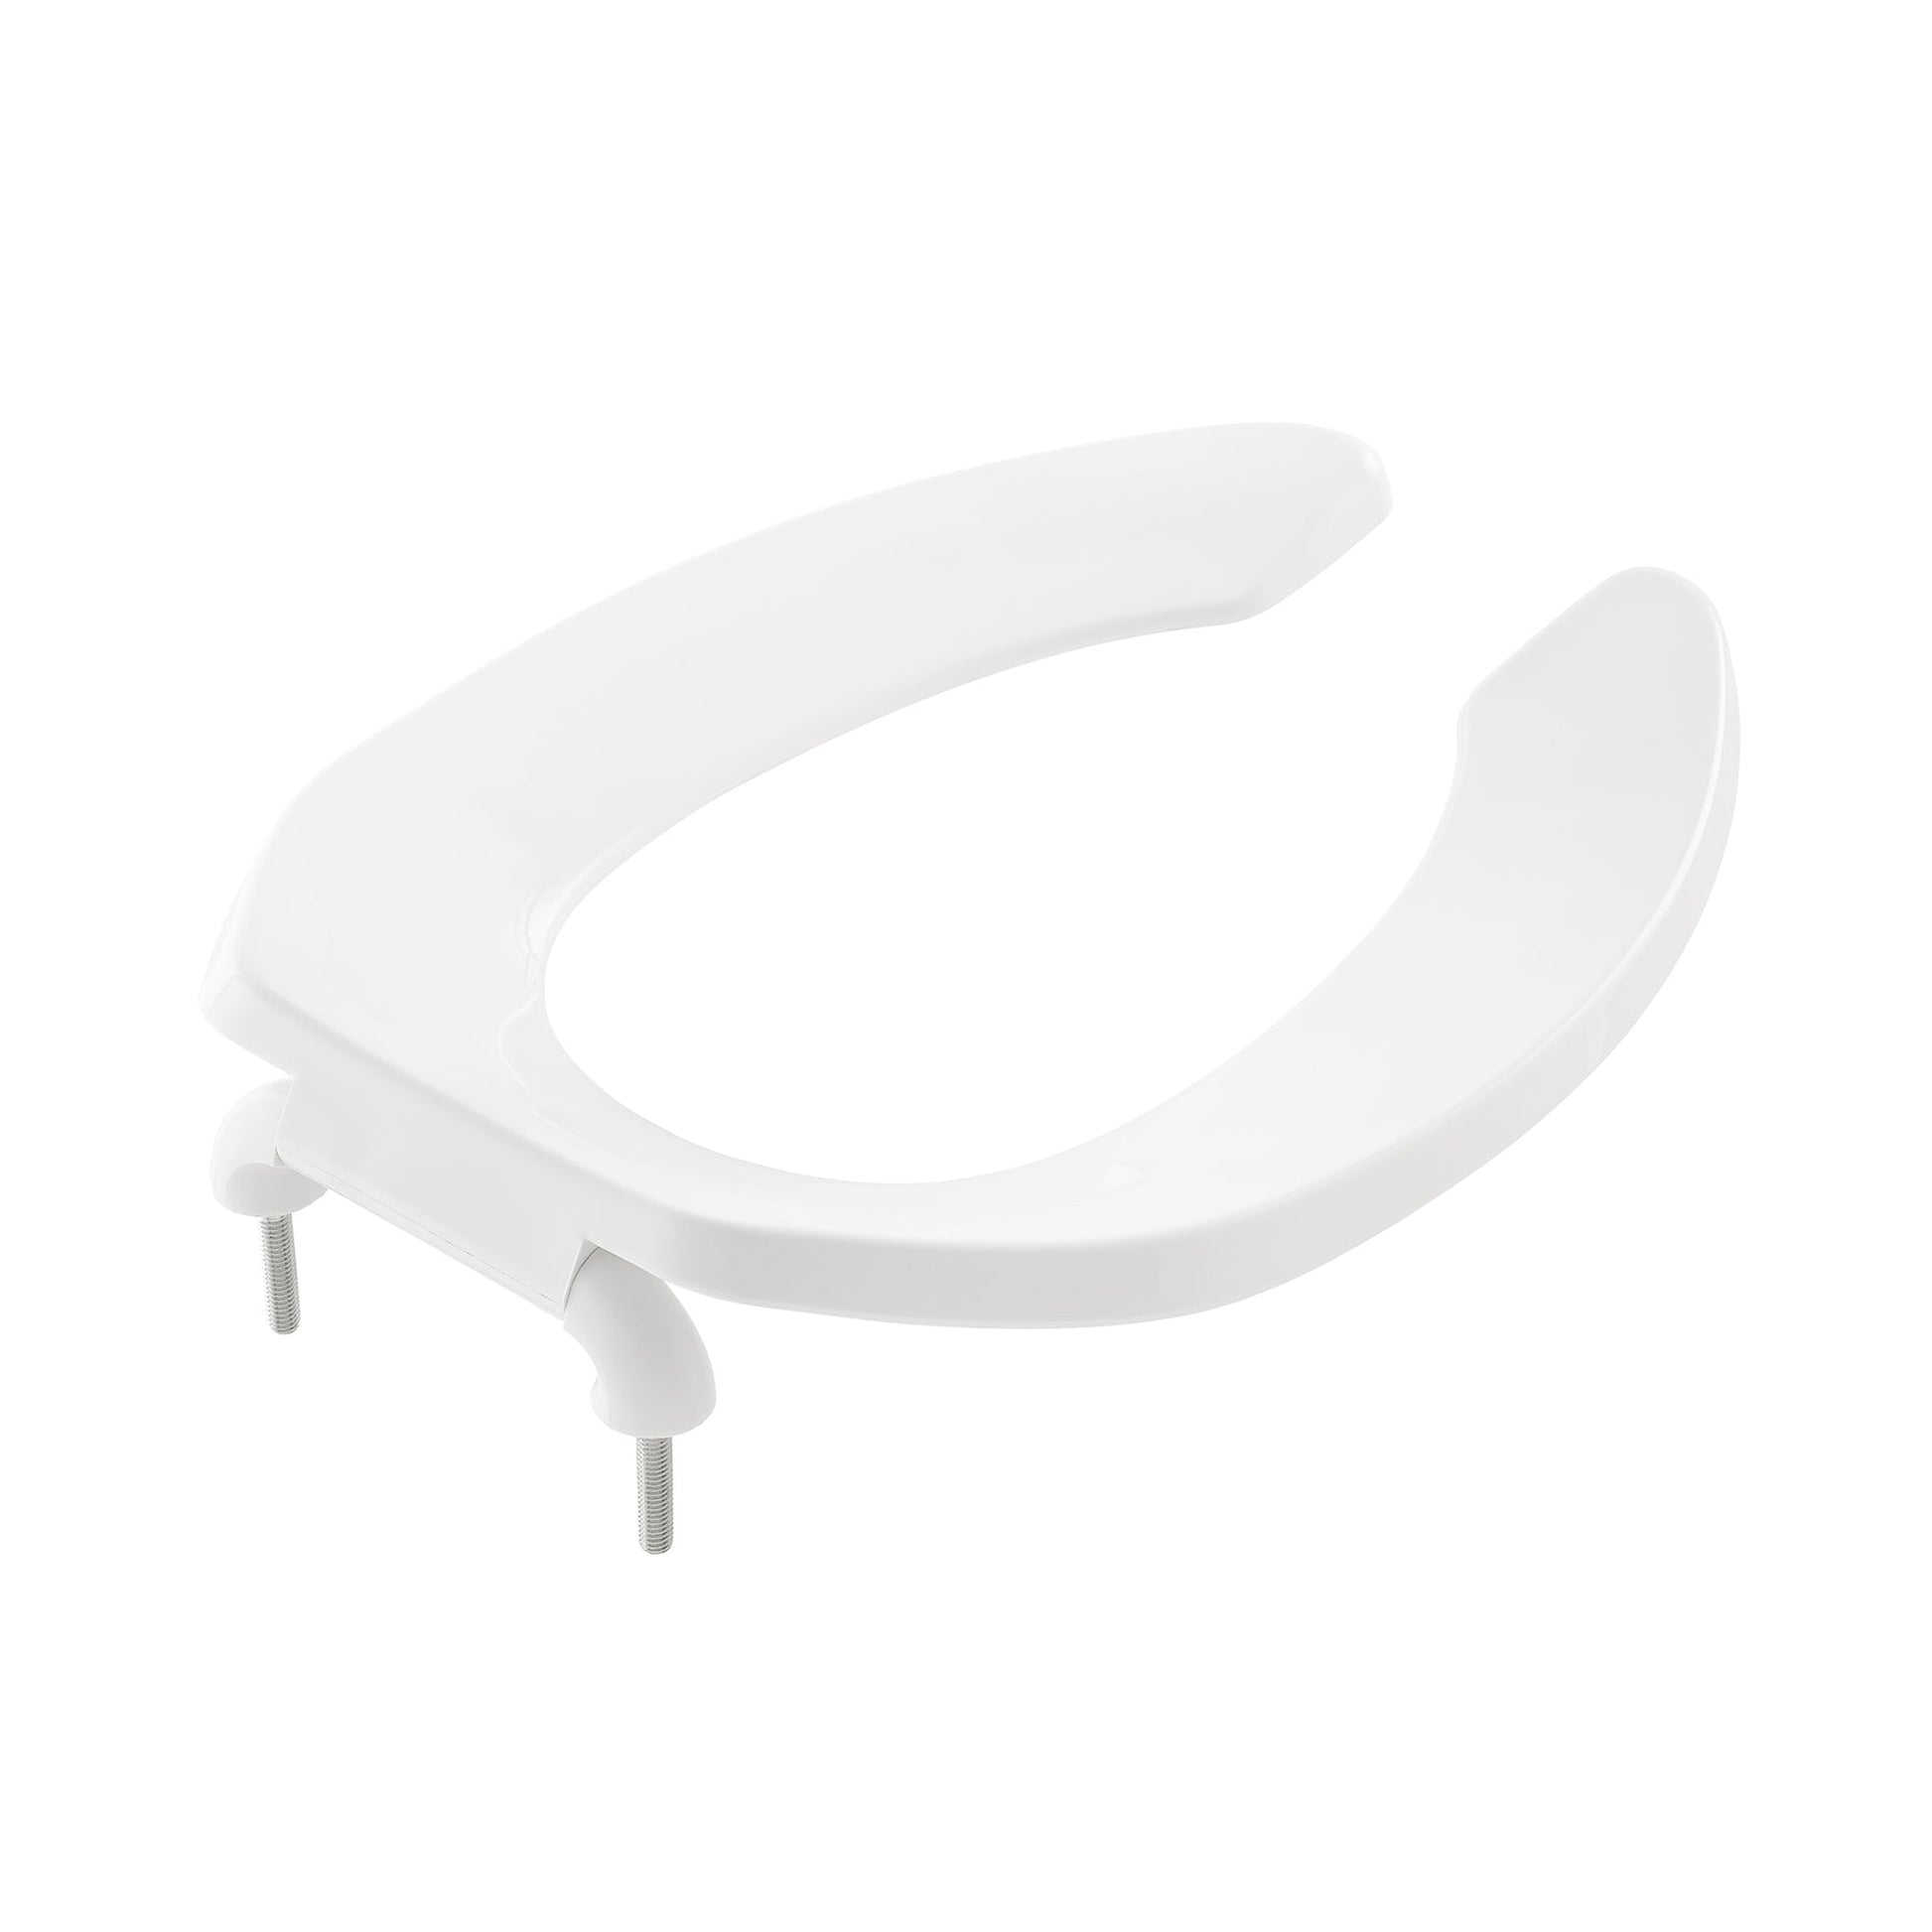 Swiss Madison Commercial Standard 14" White Open Front Elongated Toilet Seat Without Lid